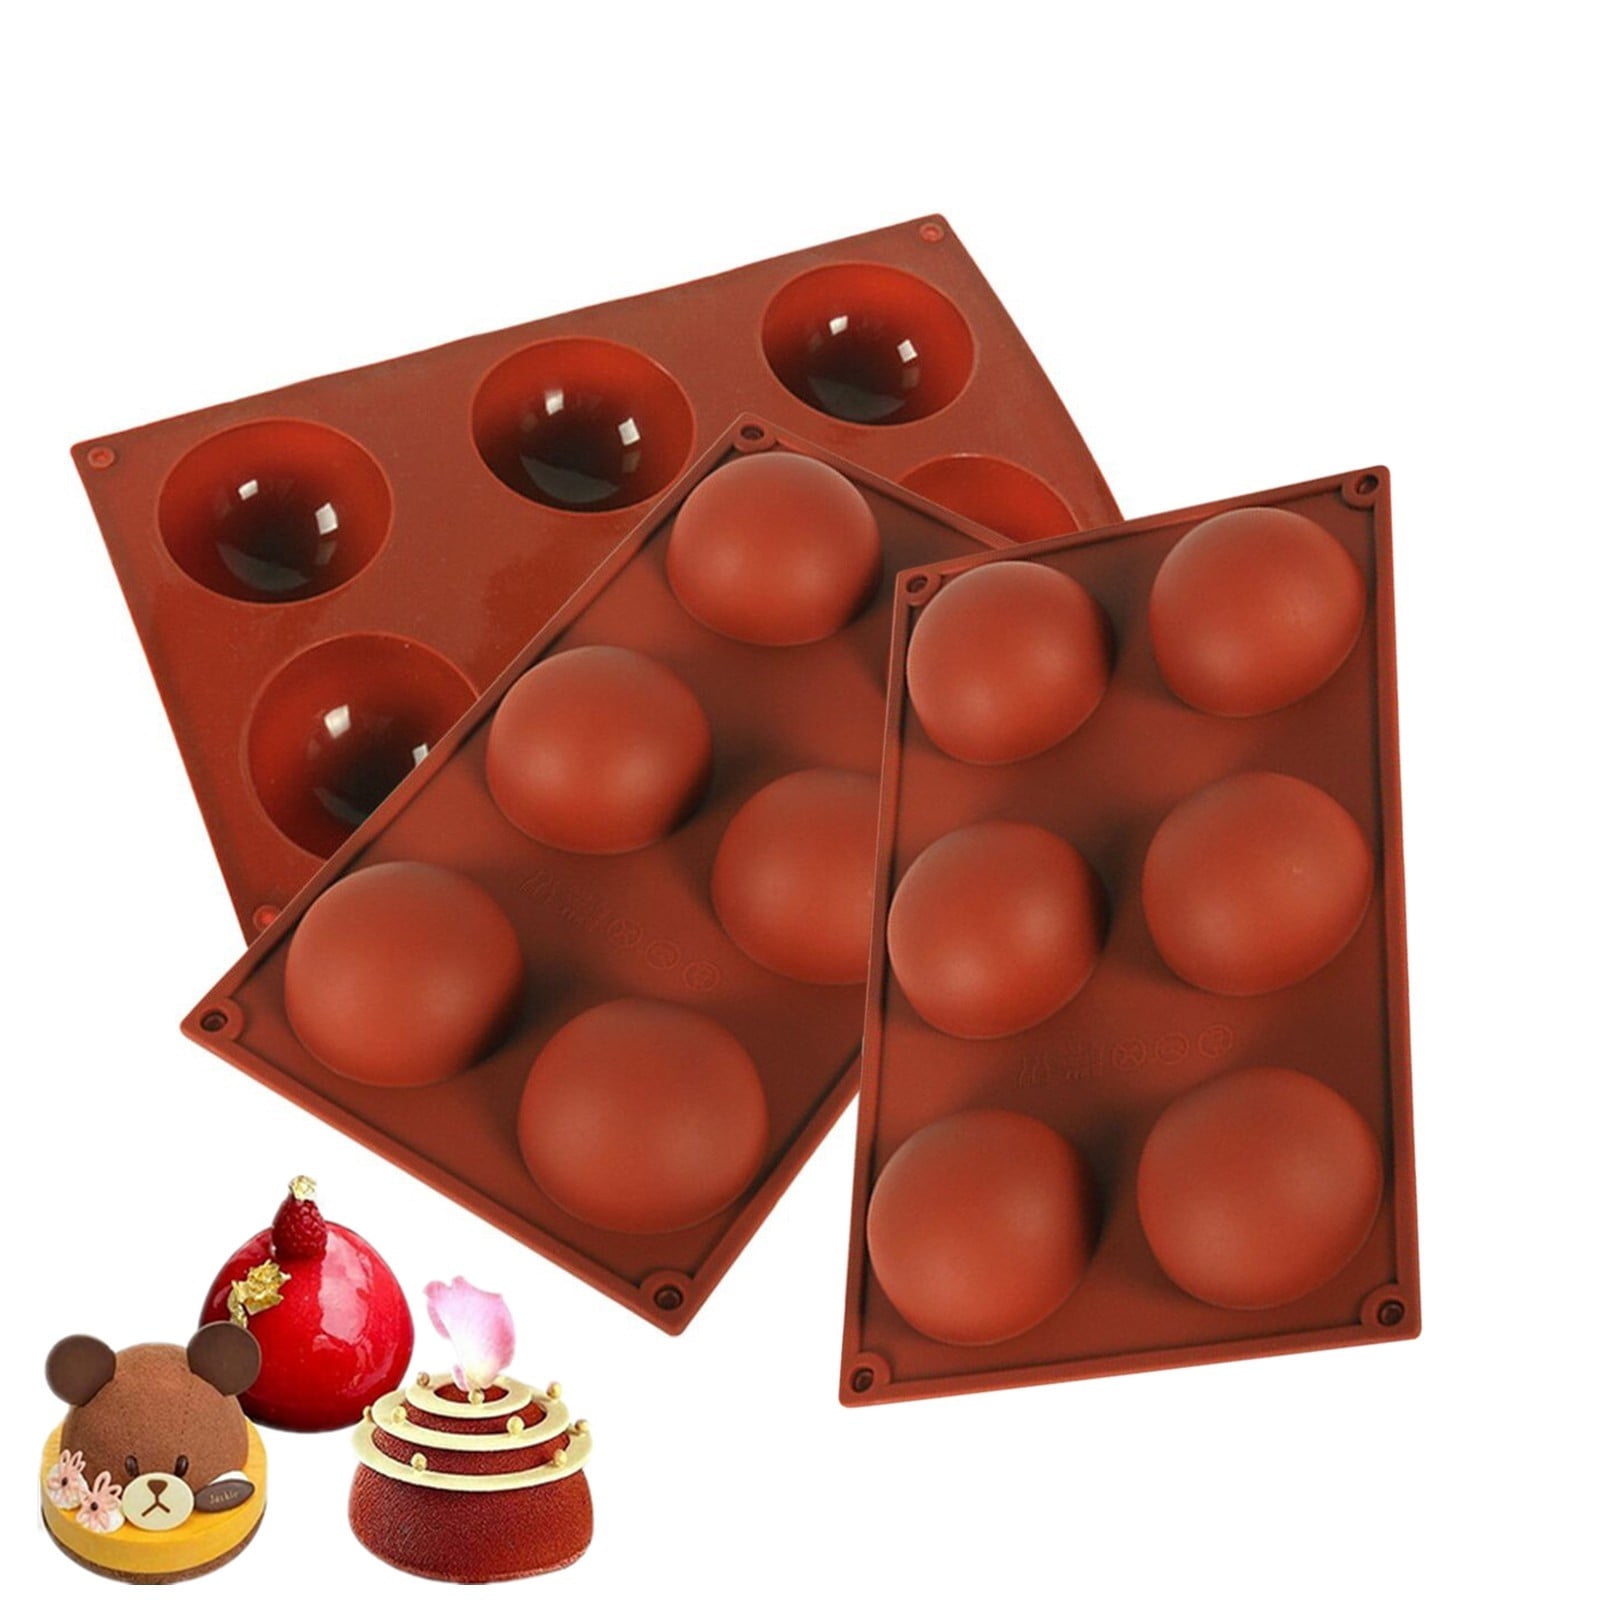 6-Cavity Silicone Mold For Soap Chocolate Cake Jelly Pudding Cookie Baking Mould 